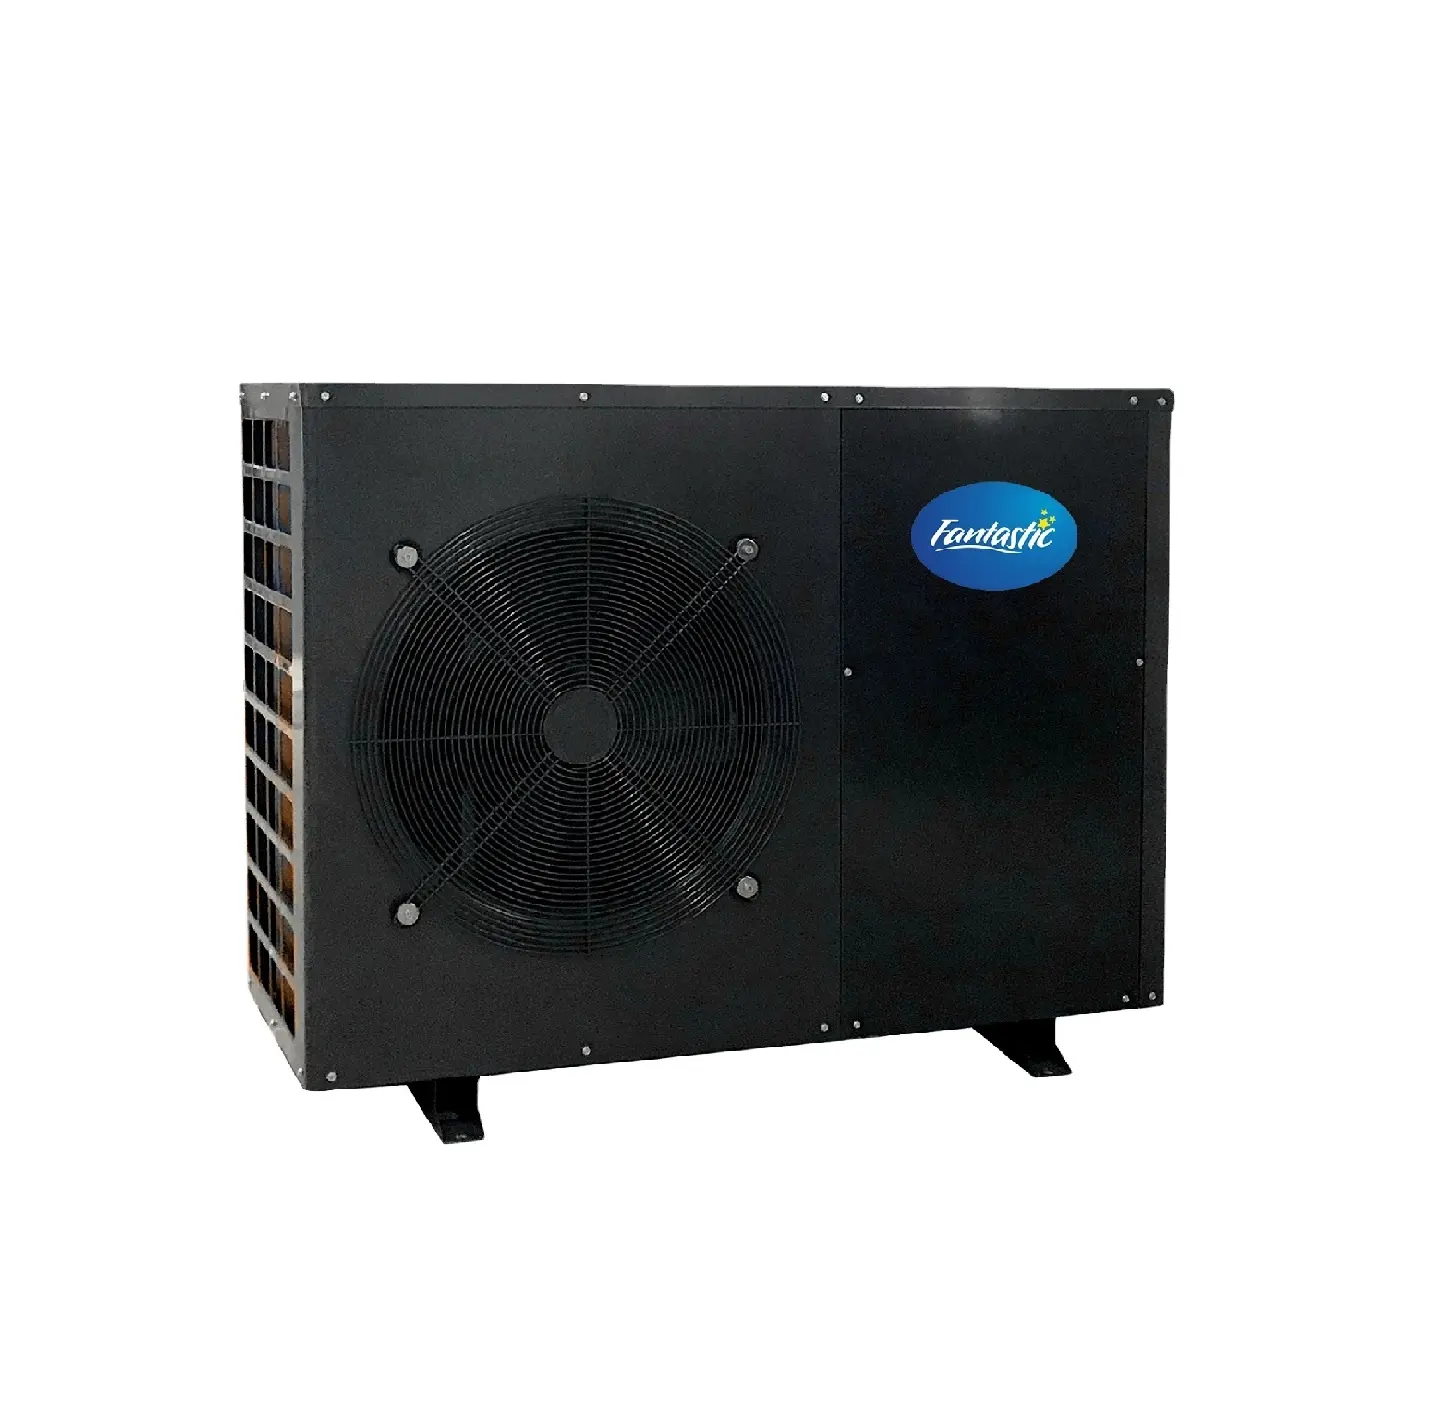 2 hp water chiller system chiller water cooled cooling water chillers machine cooling and heating heat pump